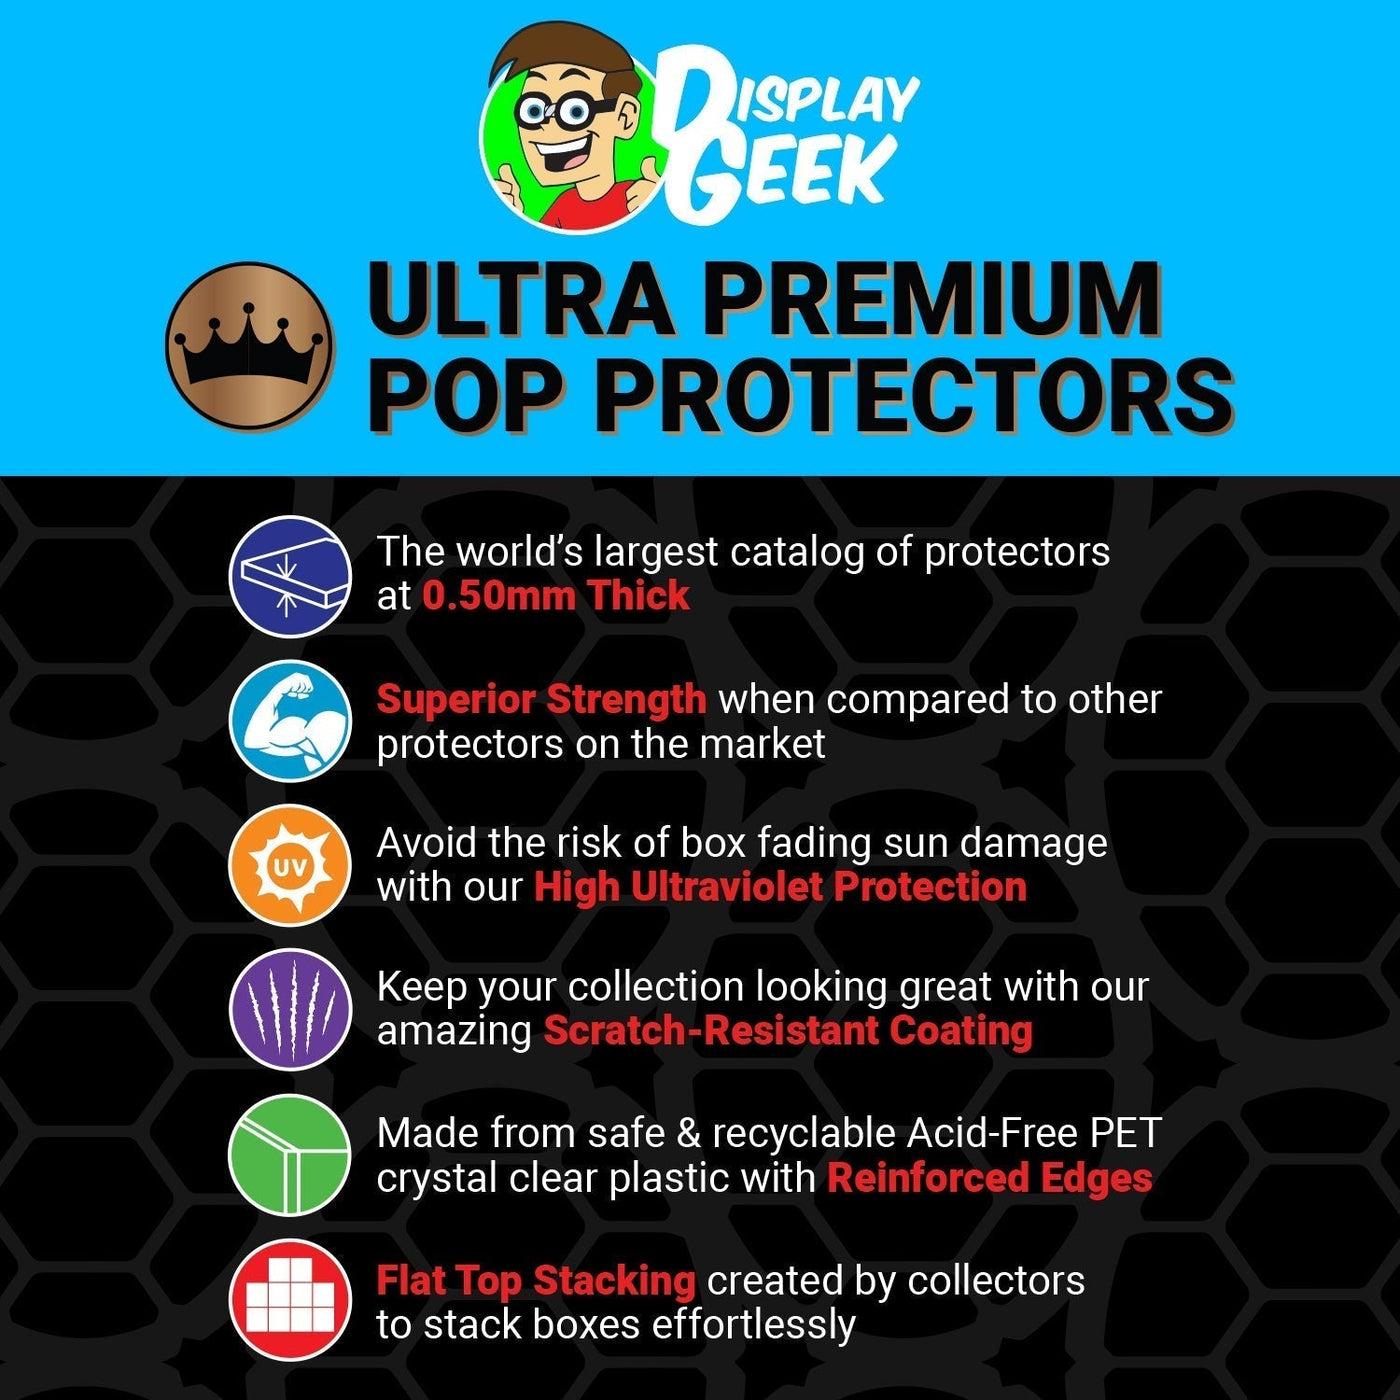 Pop Protector for Rocko's Modern Life FunkO's Cereal Box on The Protector Guide App by Display Geek